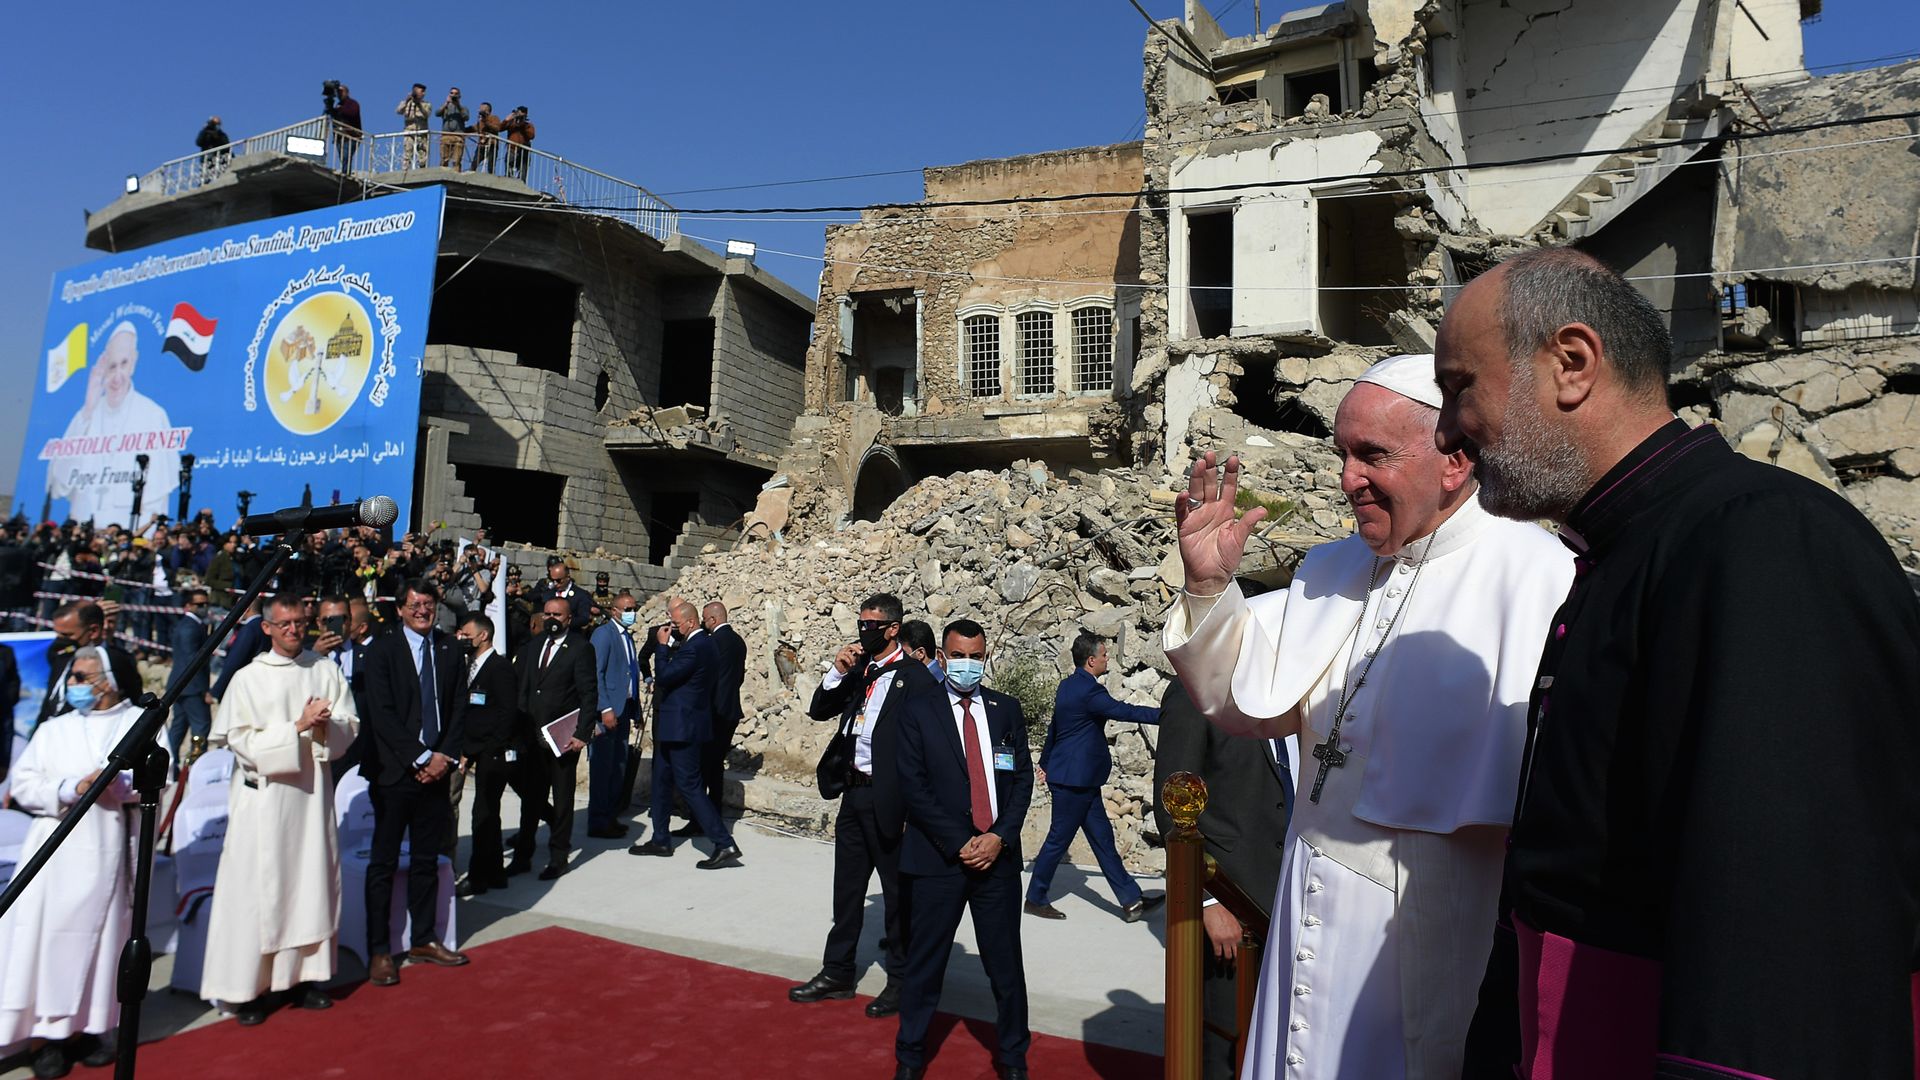  Pope Francis (C), raises his hand in greeting as he arrives at a square near the ruins of the Syriac Catholic Church of the Immaculate Conception in northern Iraq